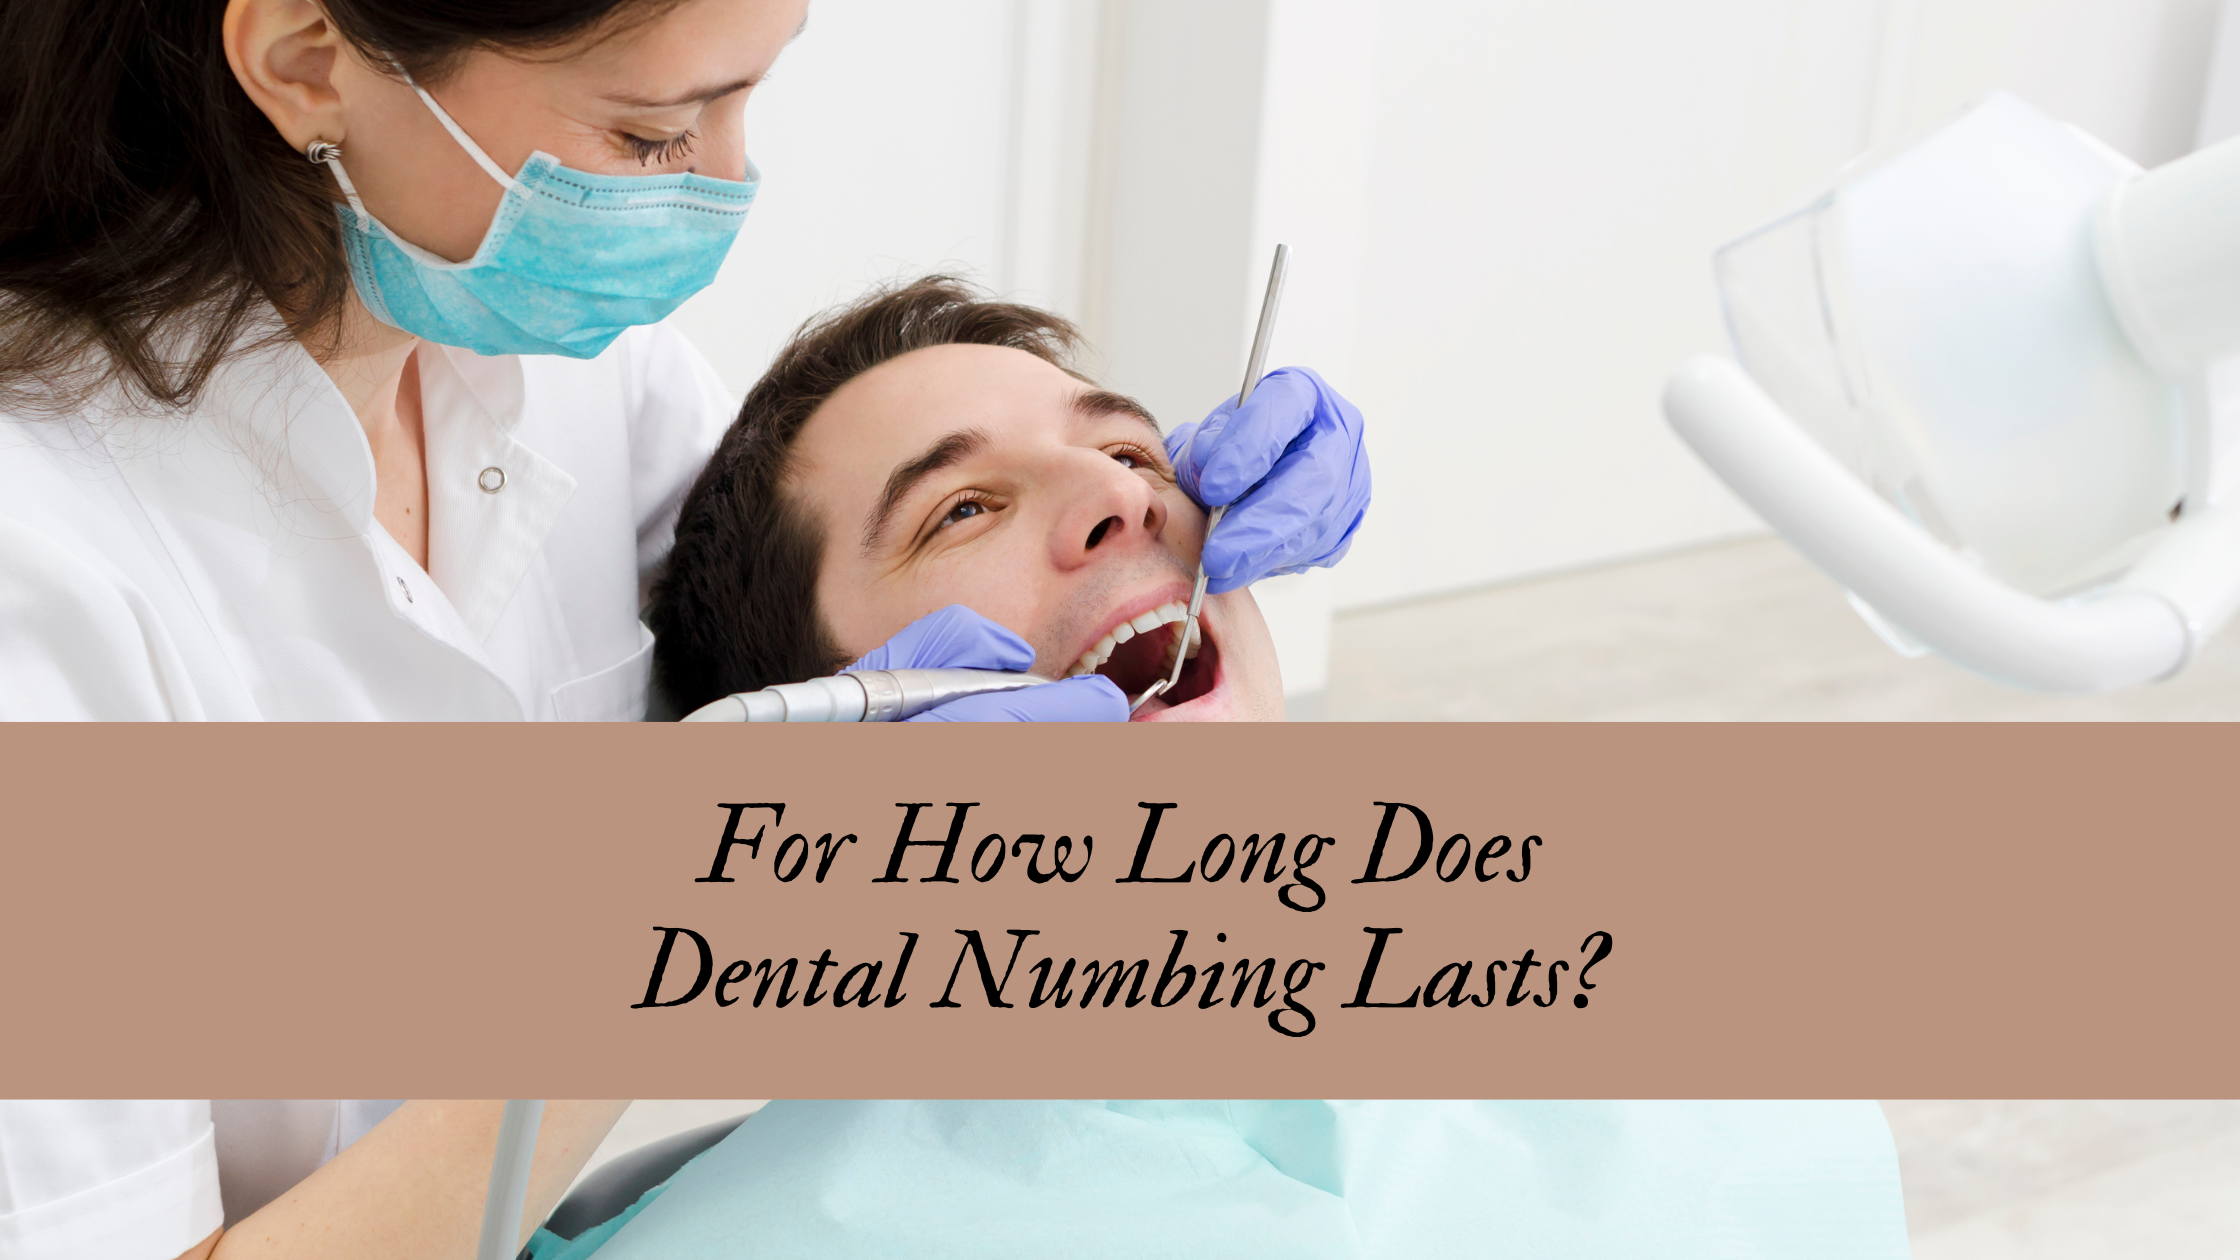 For How Long Does Dental Numbing Lasts?